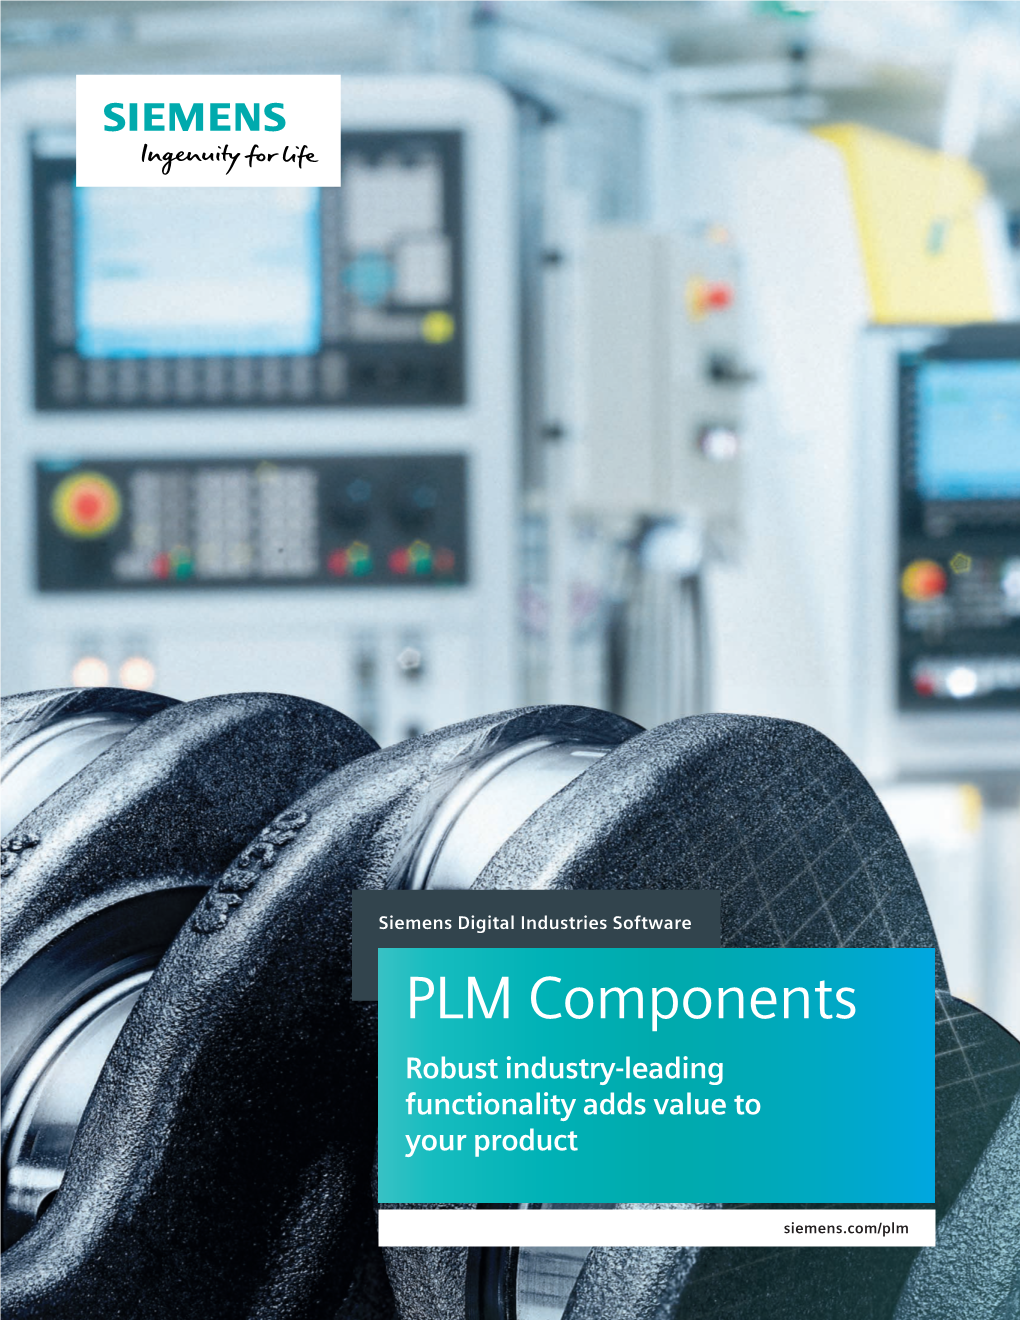 PLM Components Robust Industry-Leading Functionality Adds Value to Your Product